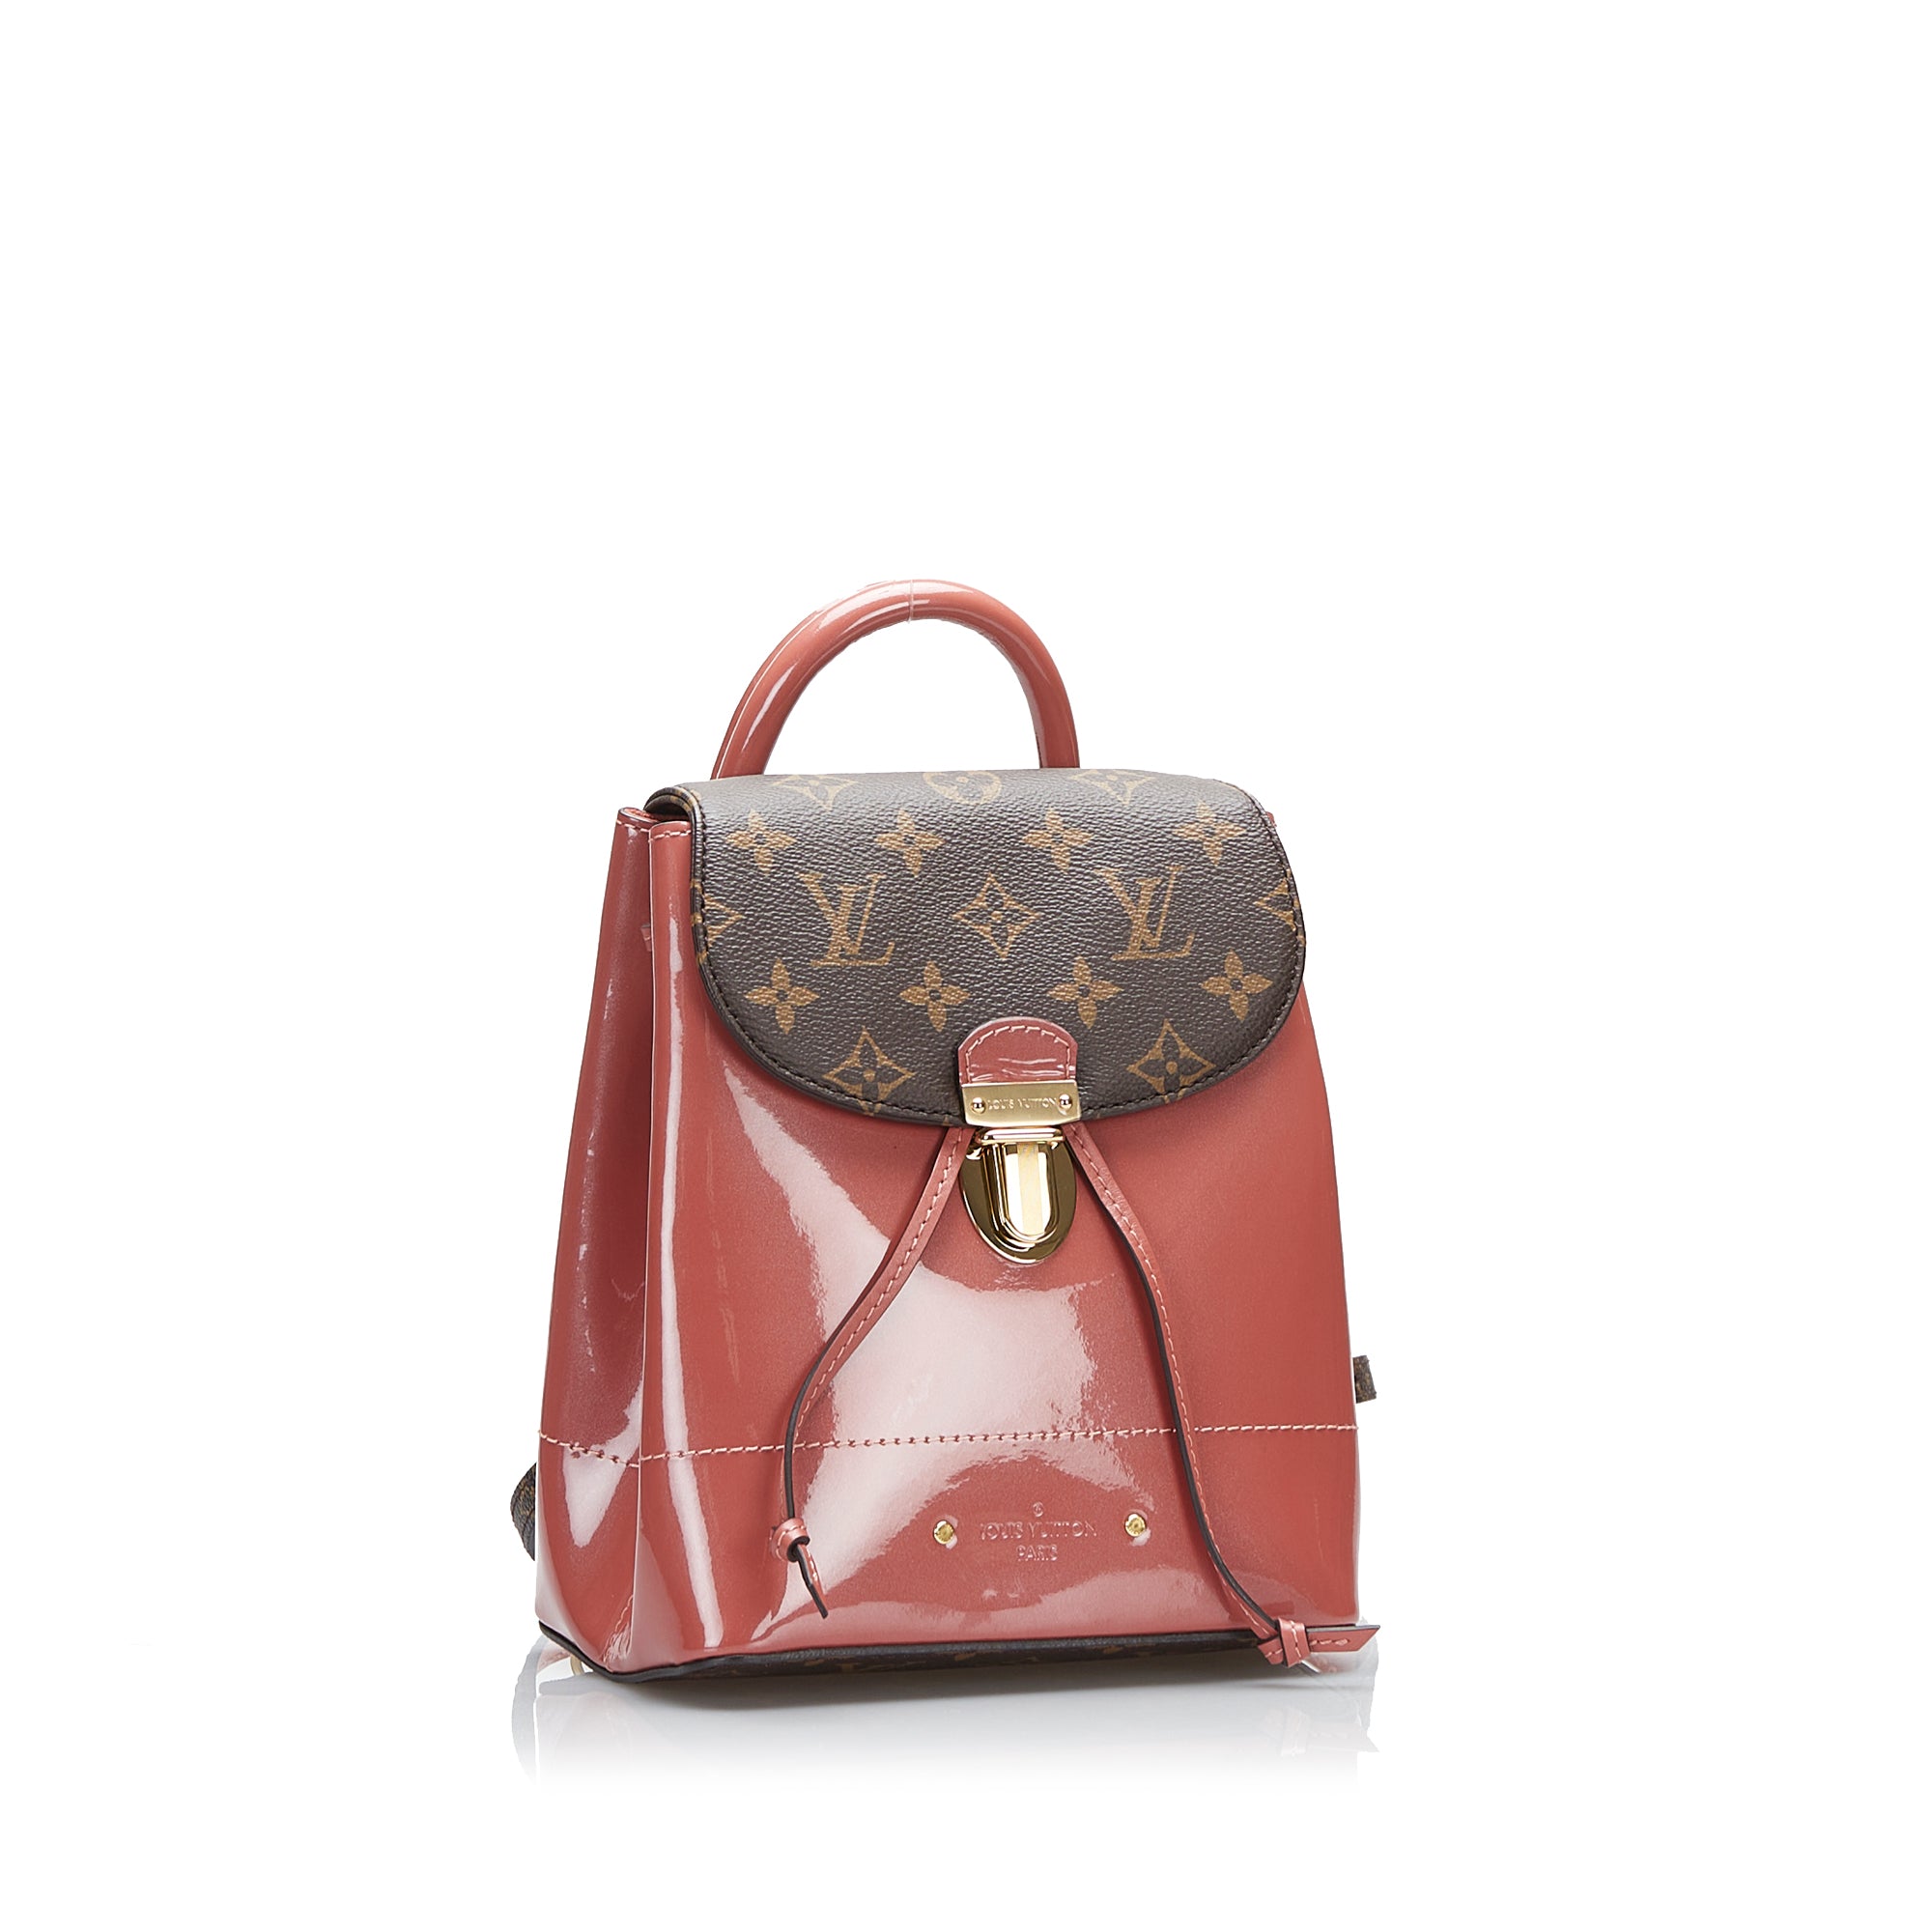 Authentic Louis Vuitton Vernis Hot Springs Backpack in Rose